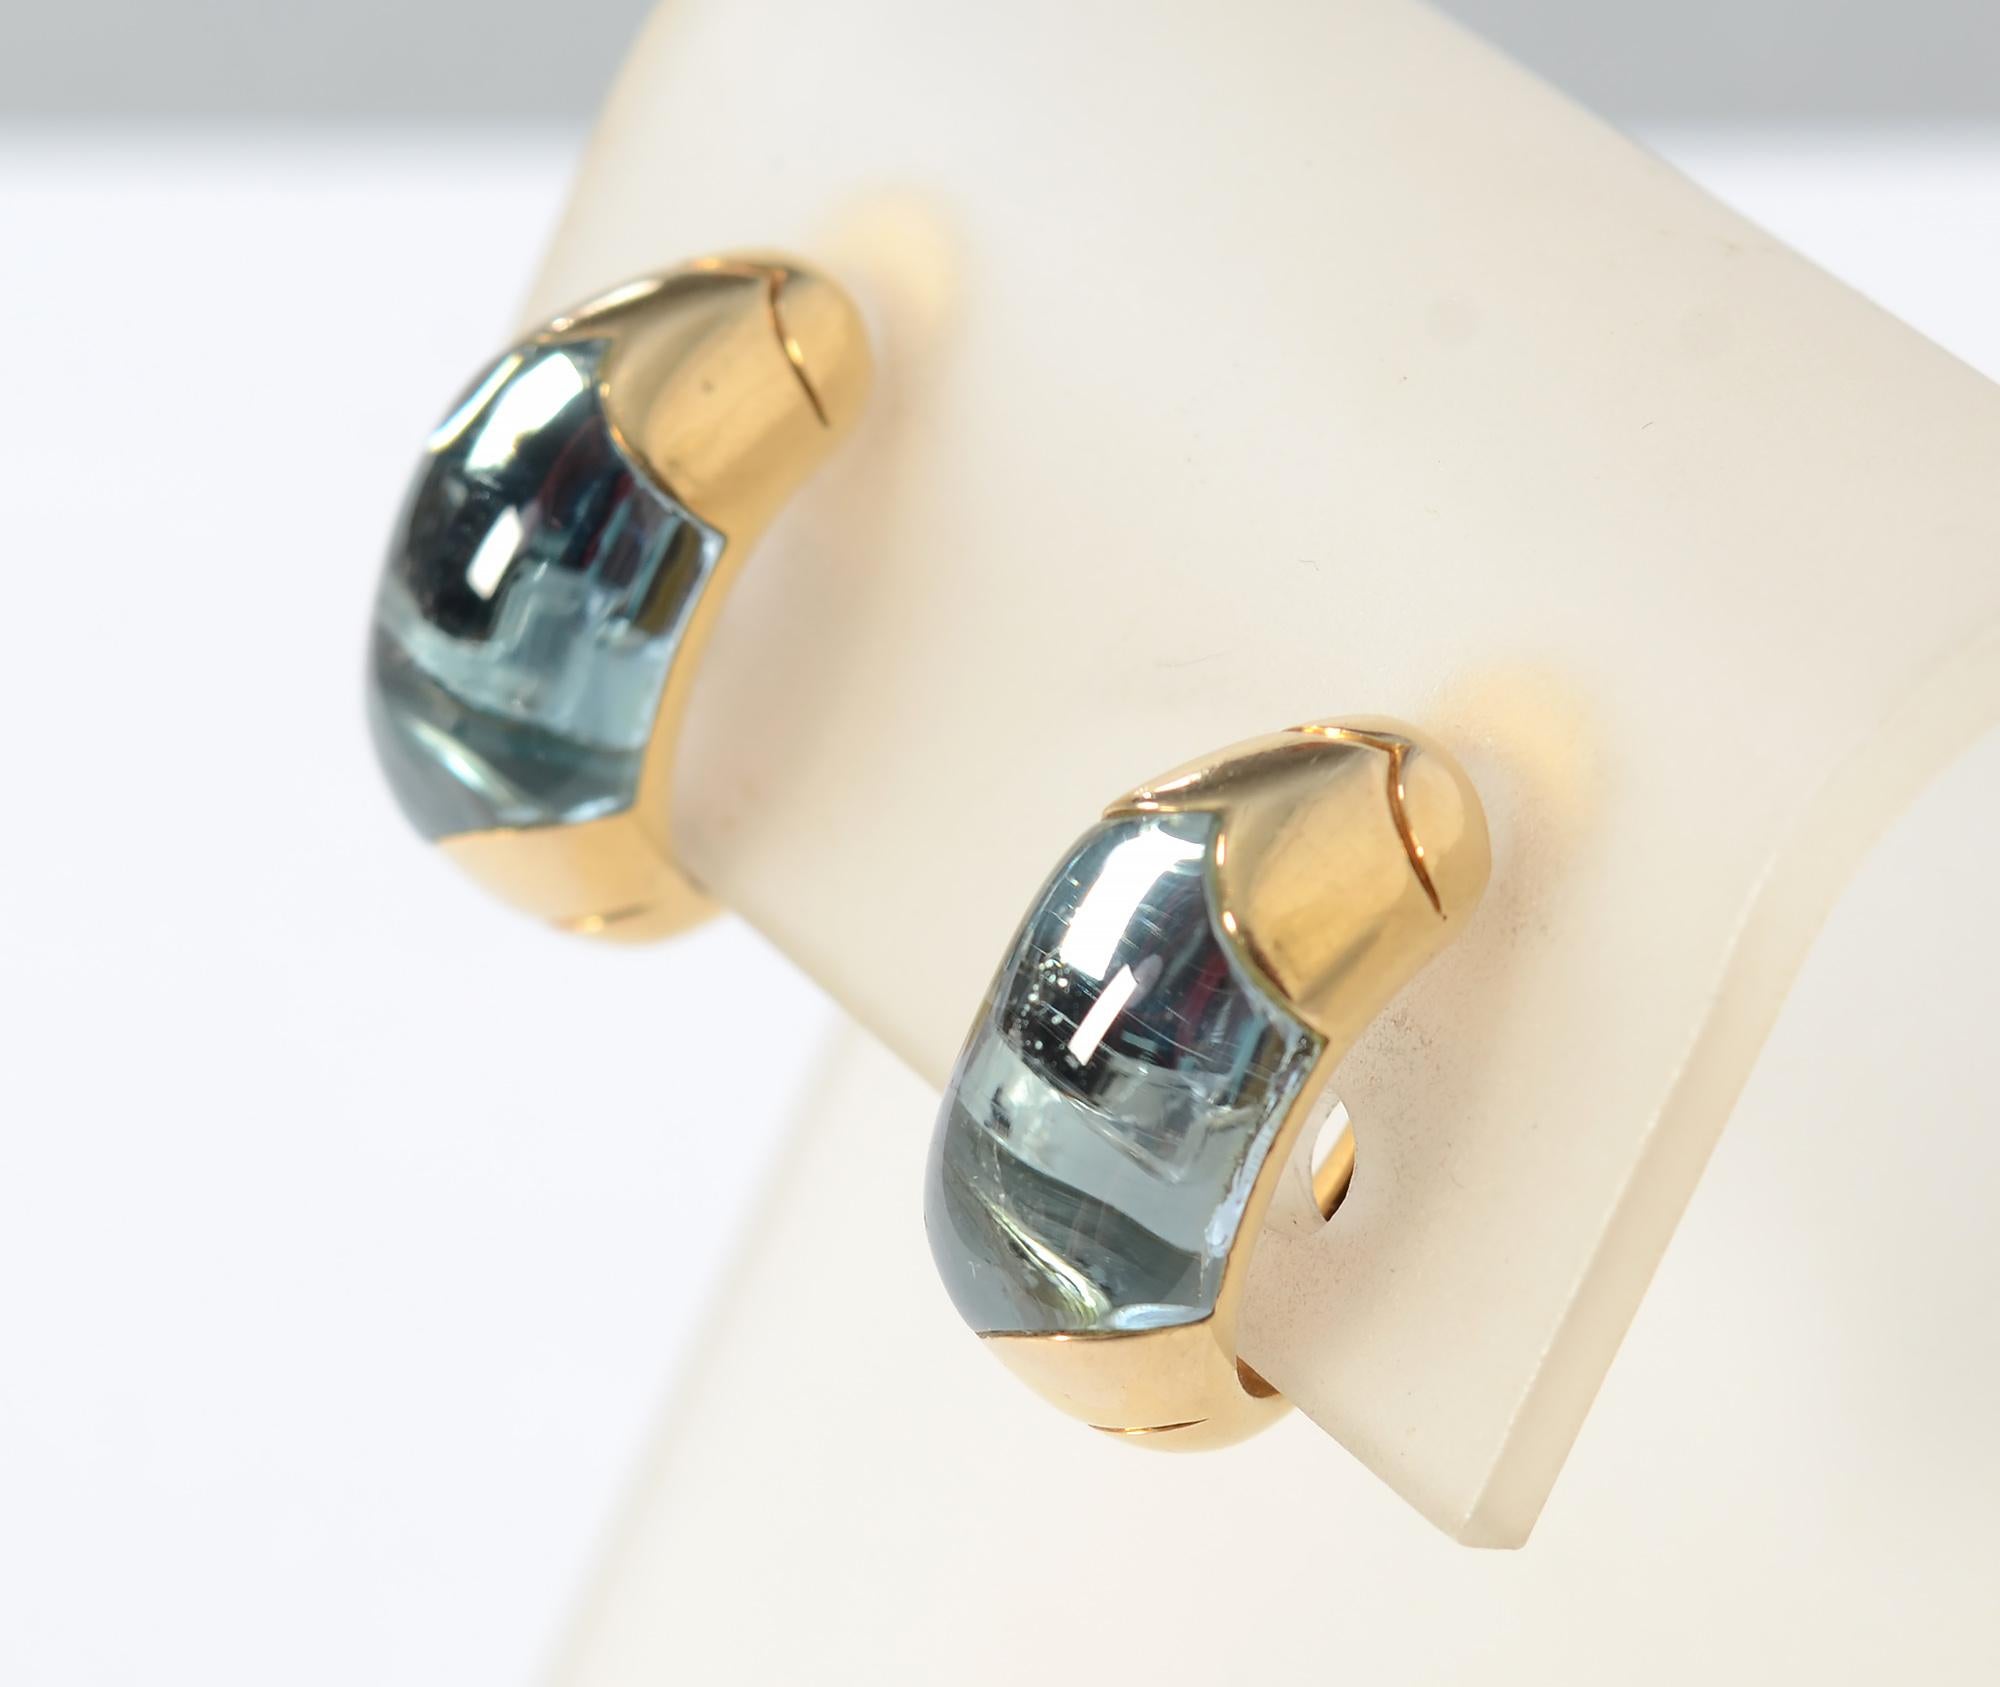 These are the perfect daytime half hoop earrings by Bulgari. They are centered with blue topaz in a stunning shade of watery blue. In real life, the color is more like that of the thumbnails than the overall image. Clip backs can be converted to